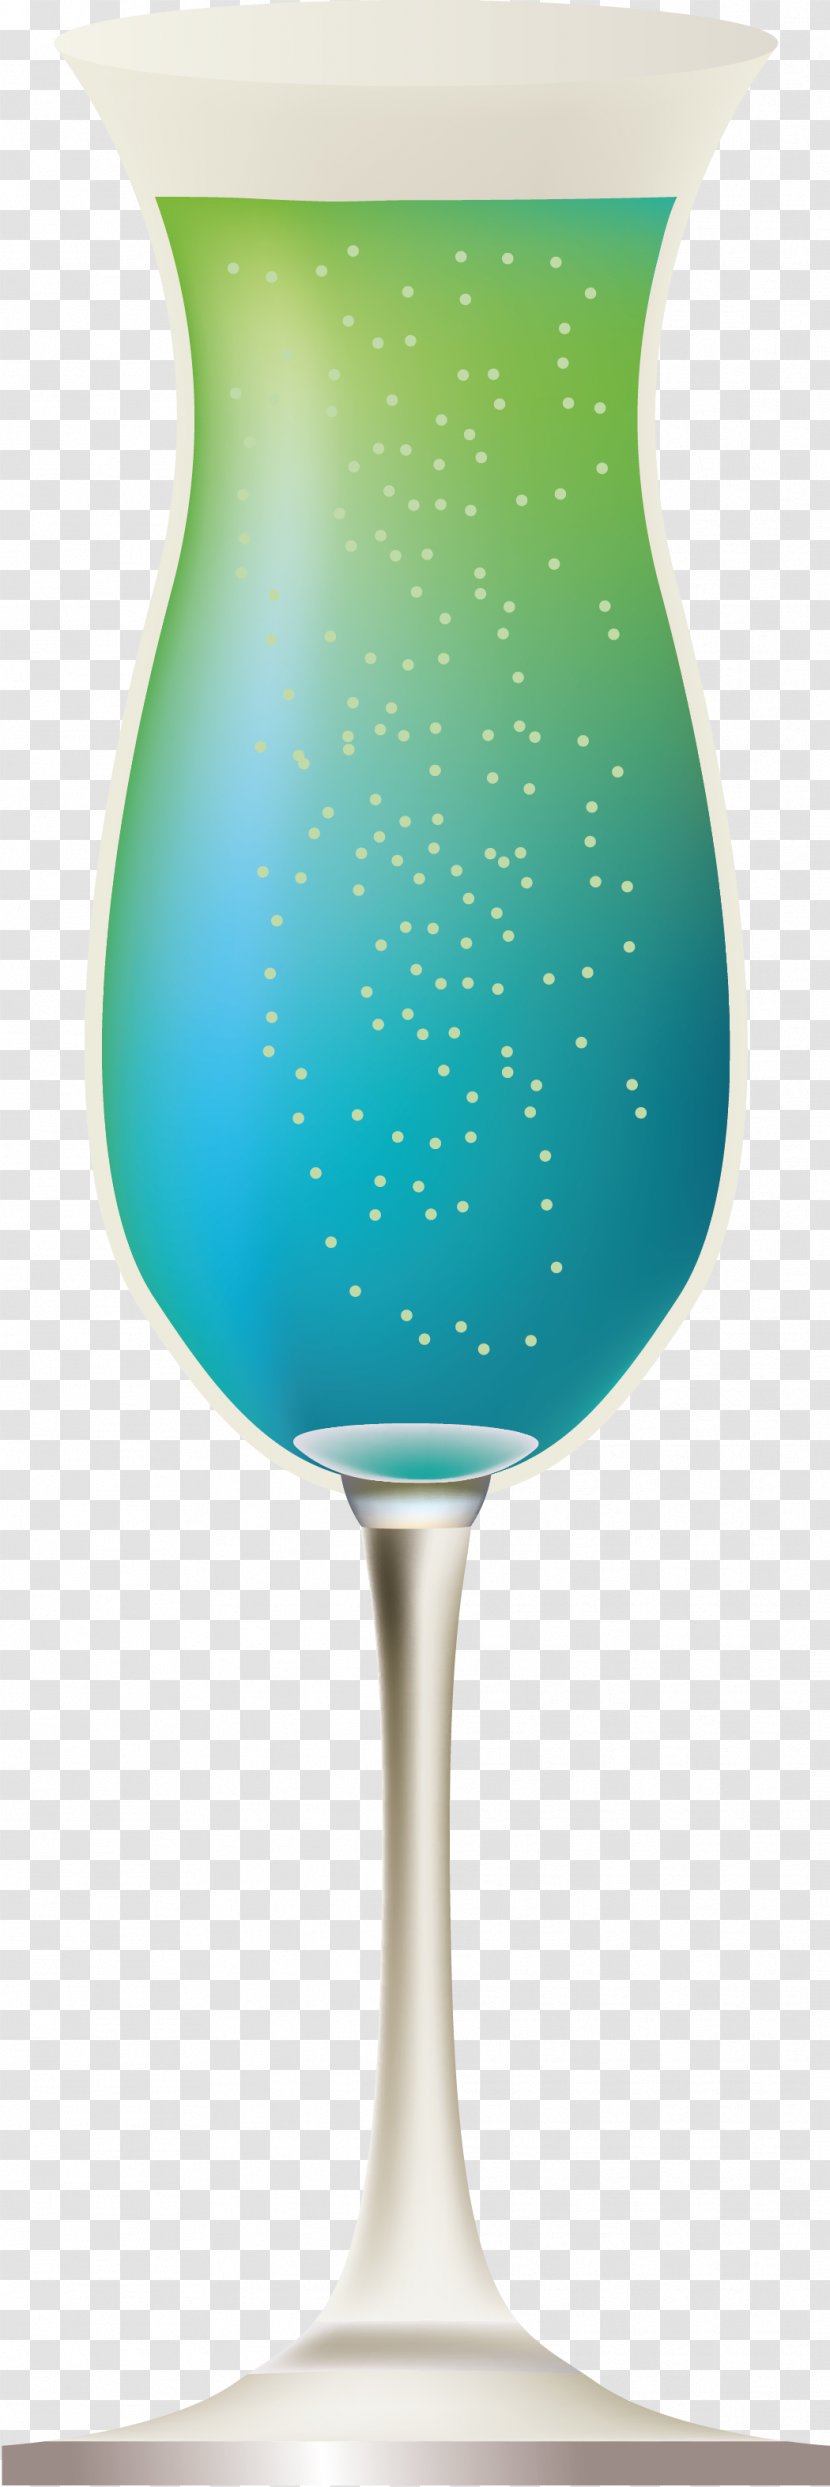 Wine Glass Food Clip Art - Alcoholic Drink Transparent PNG